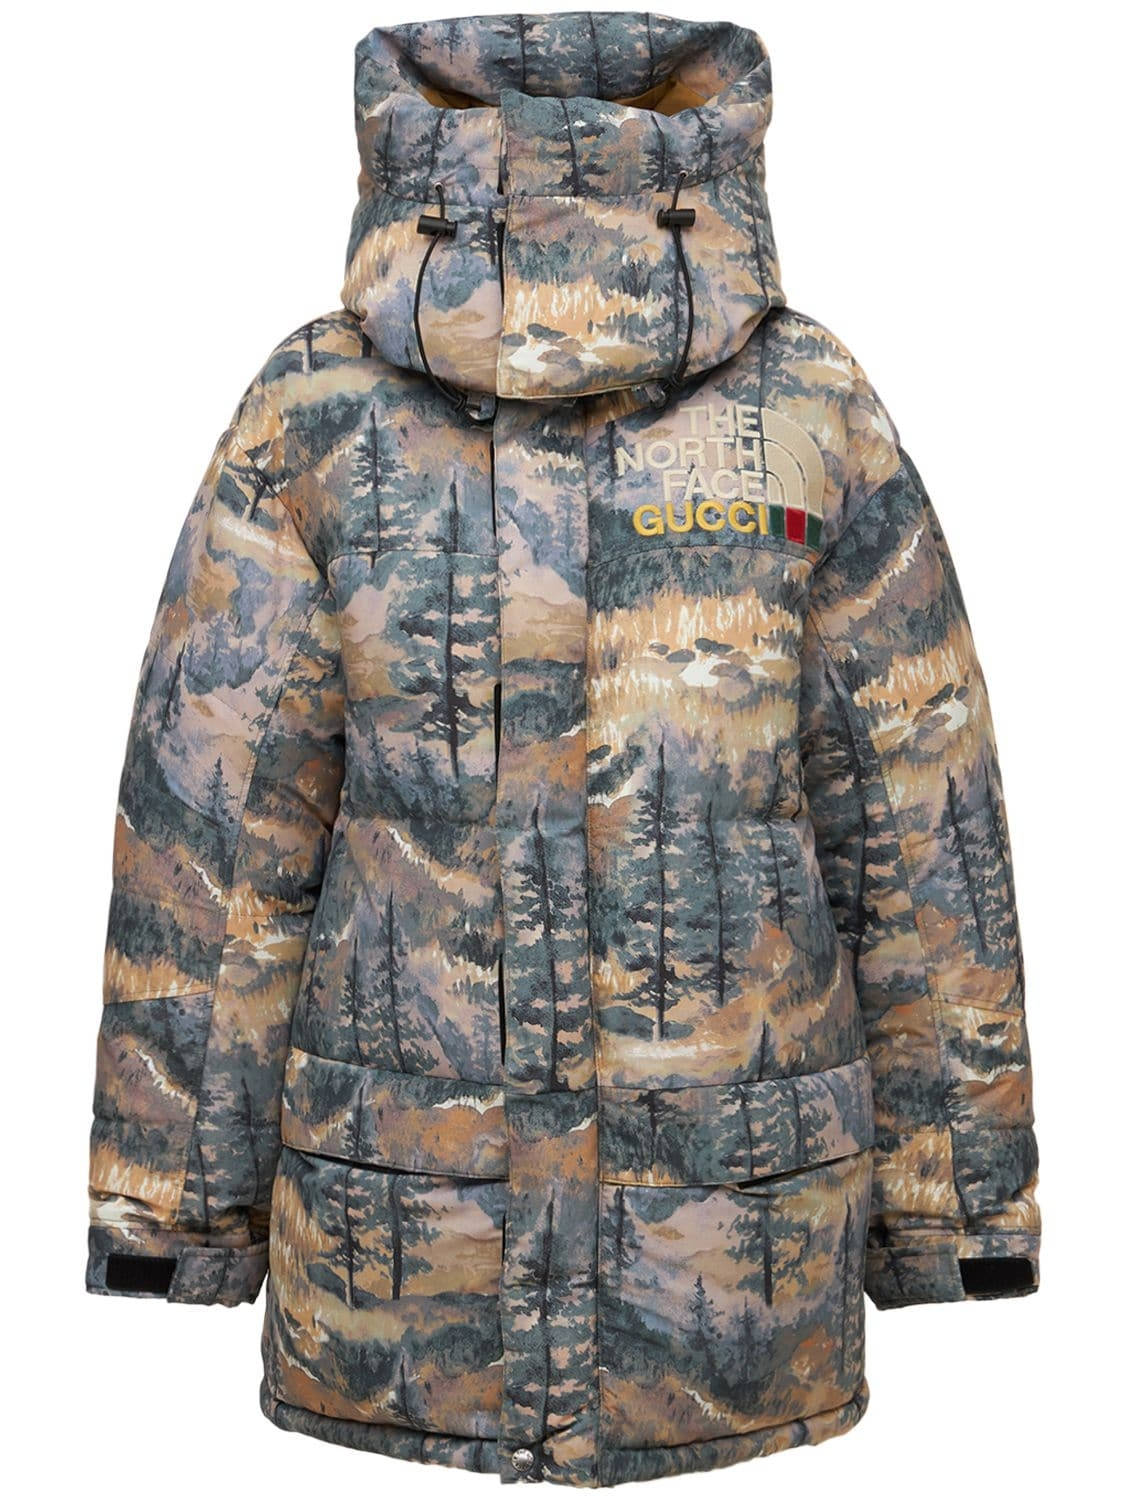 Gucci x The North Face Down Coat